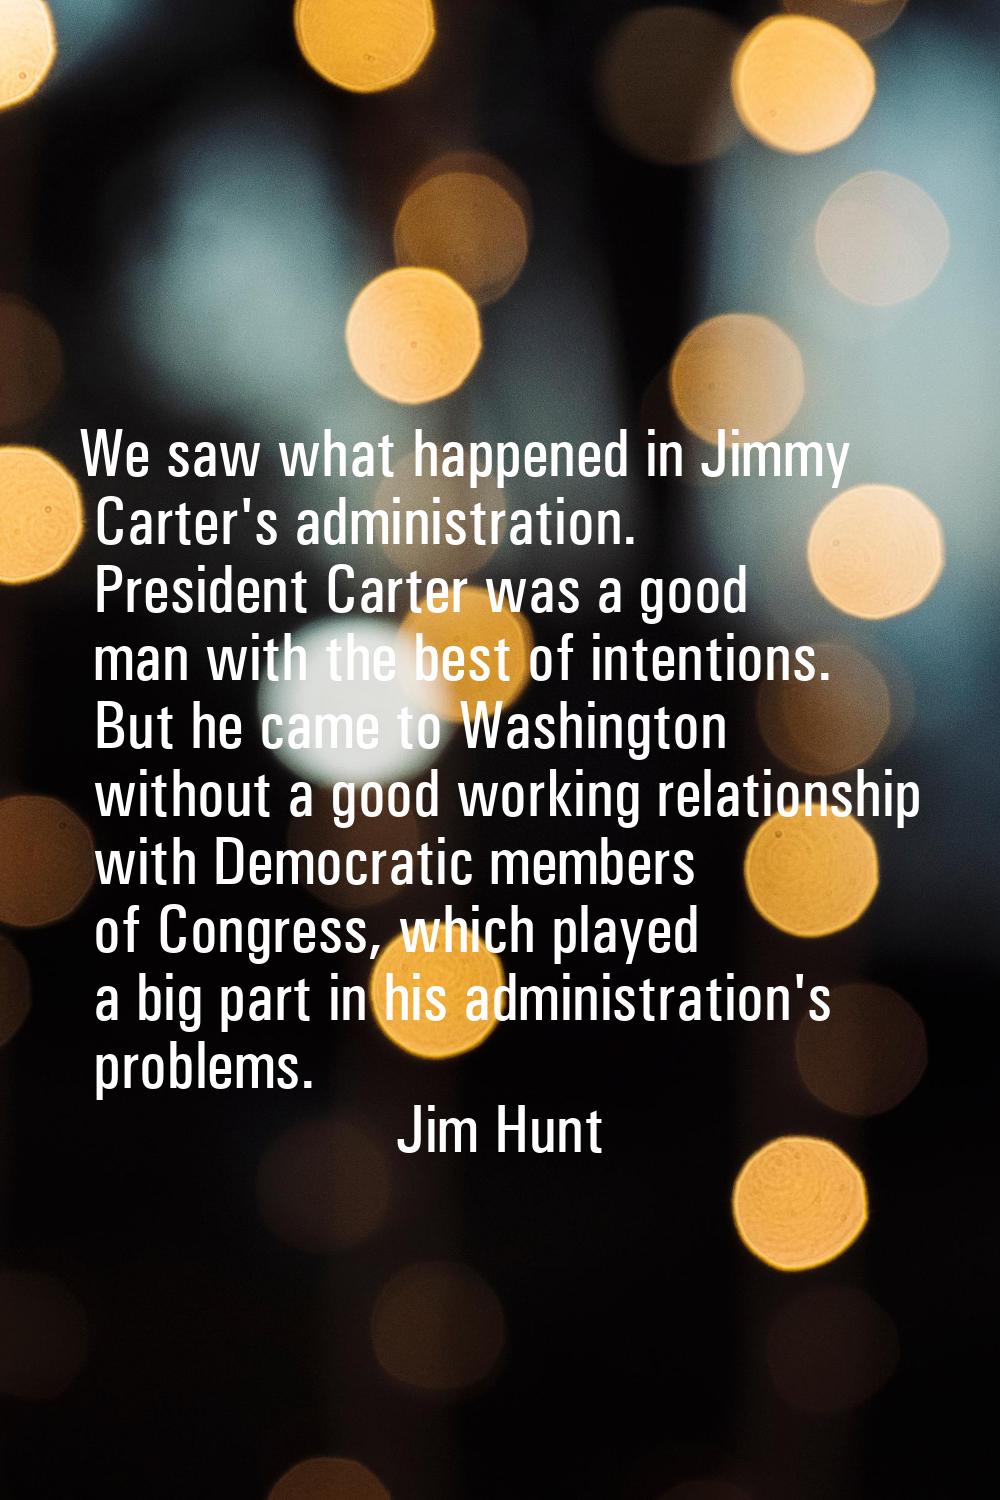 We saw what happened in Jimmy Carter's administration. President Carter was a good man with the bes